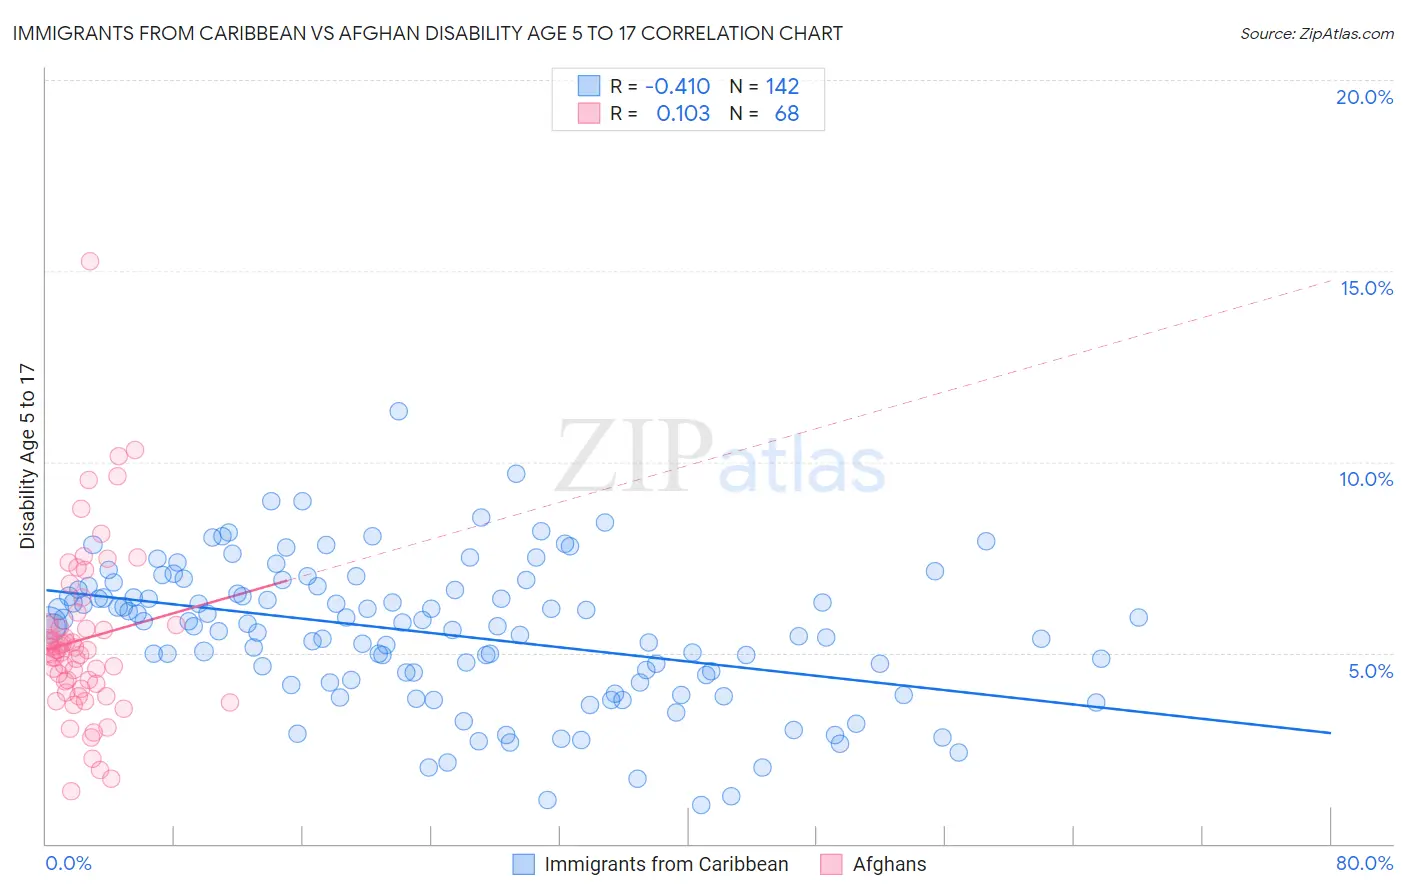 Immigrants from Caribbean vs Afghan Disability Age 5 to 17